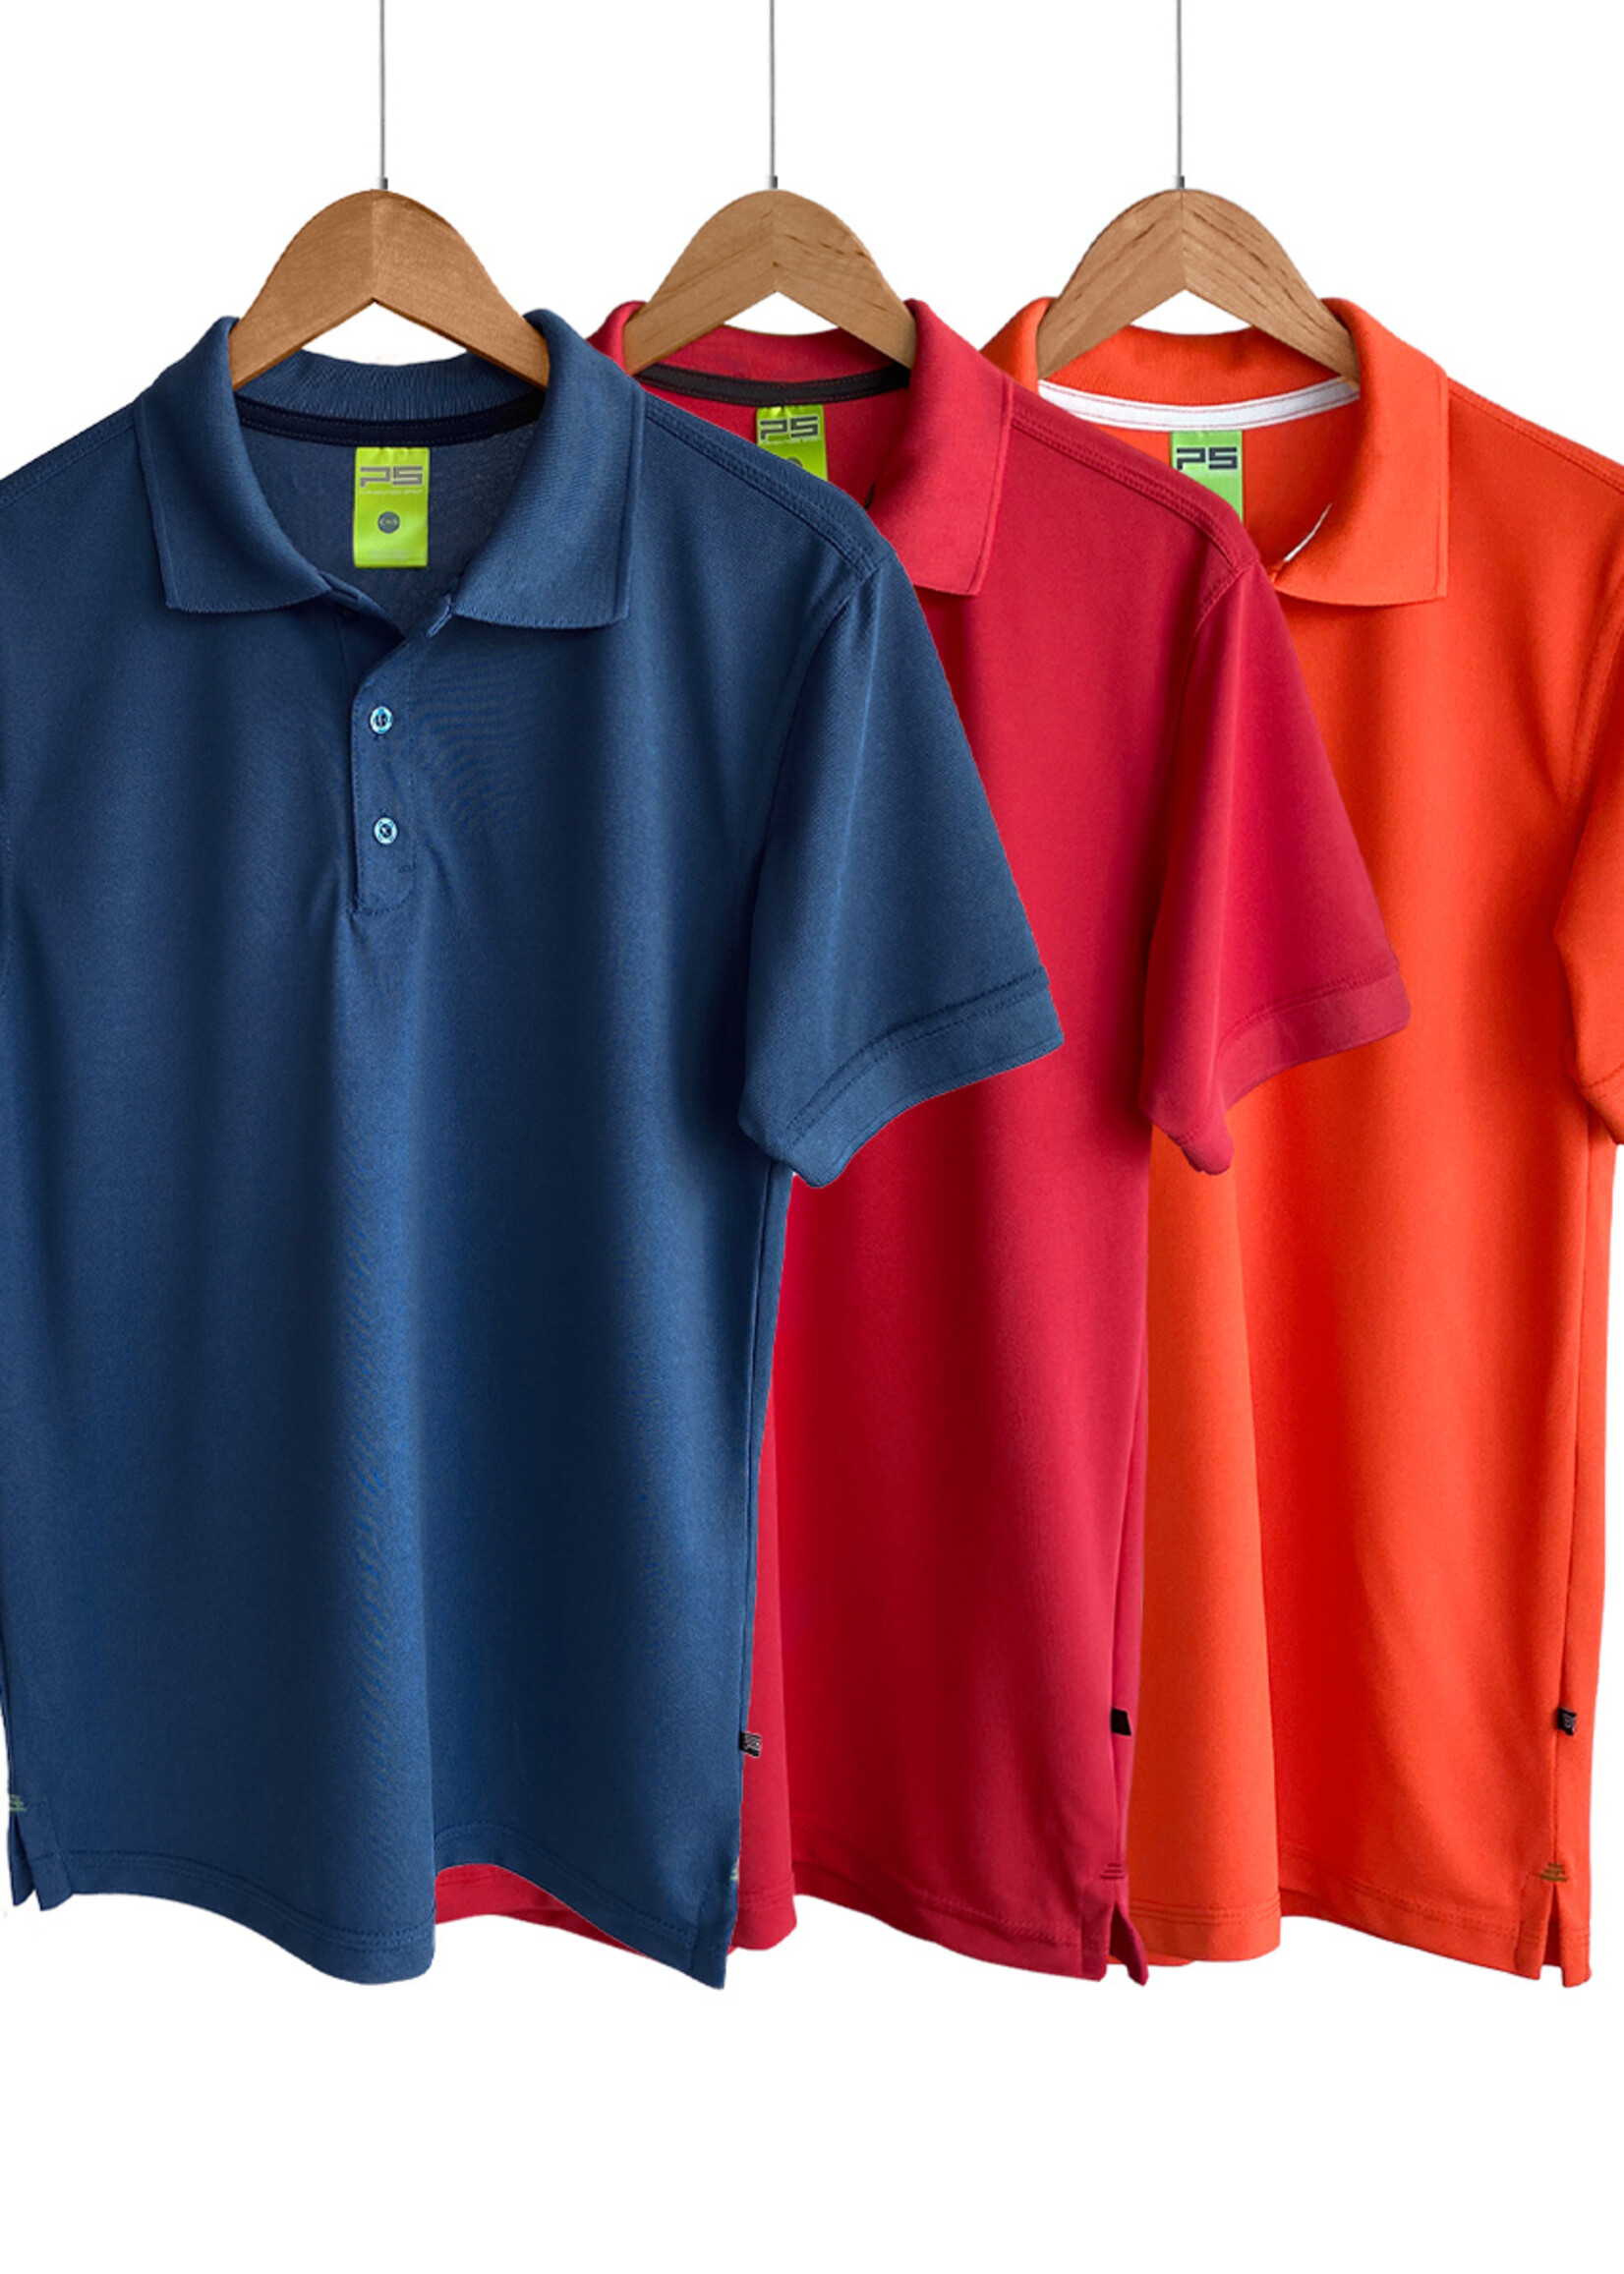 Playerytees STYLE 900C - POLYESTER POLO SPORT 100% POLYESTER